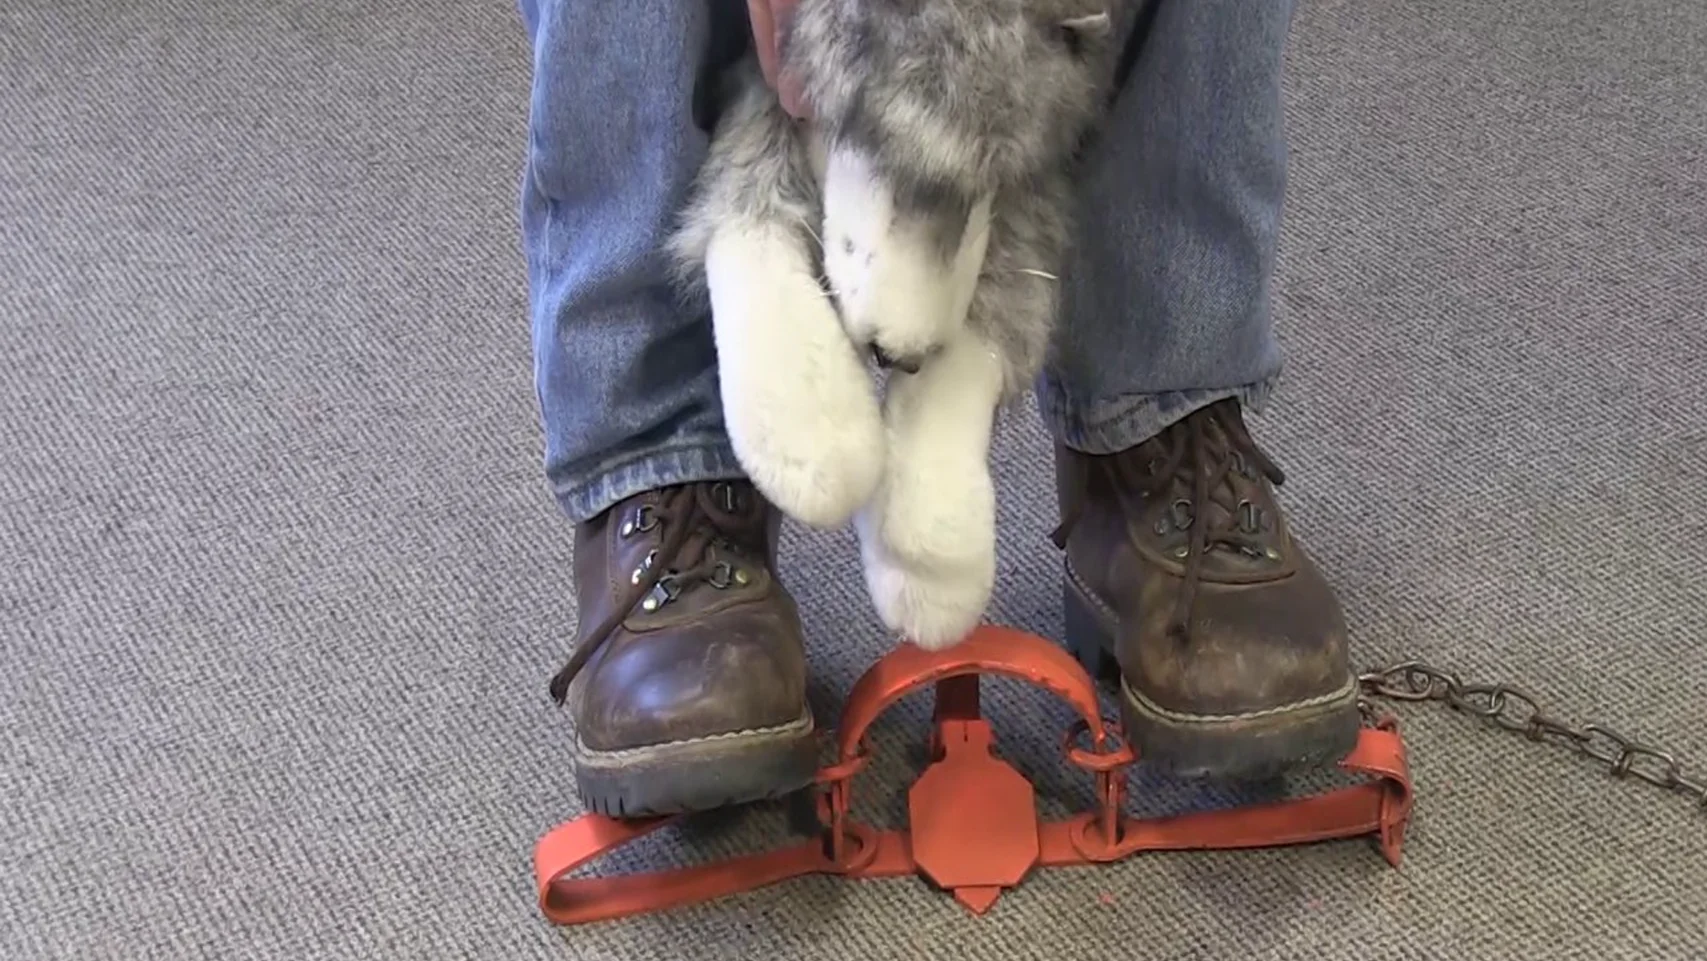 How to Release a dog from a bodygrip trap (also known as a Conibear Trap)  on Vimeo